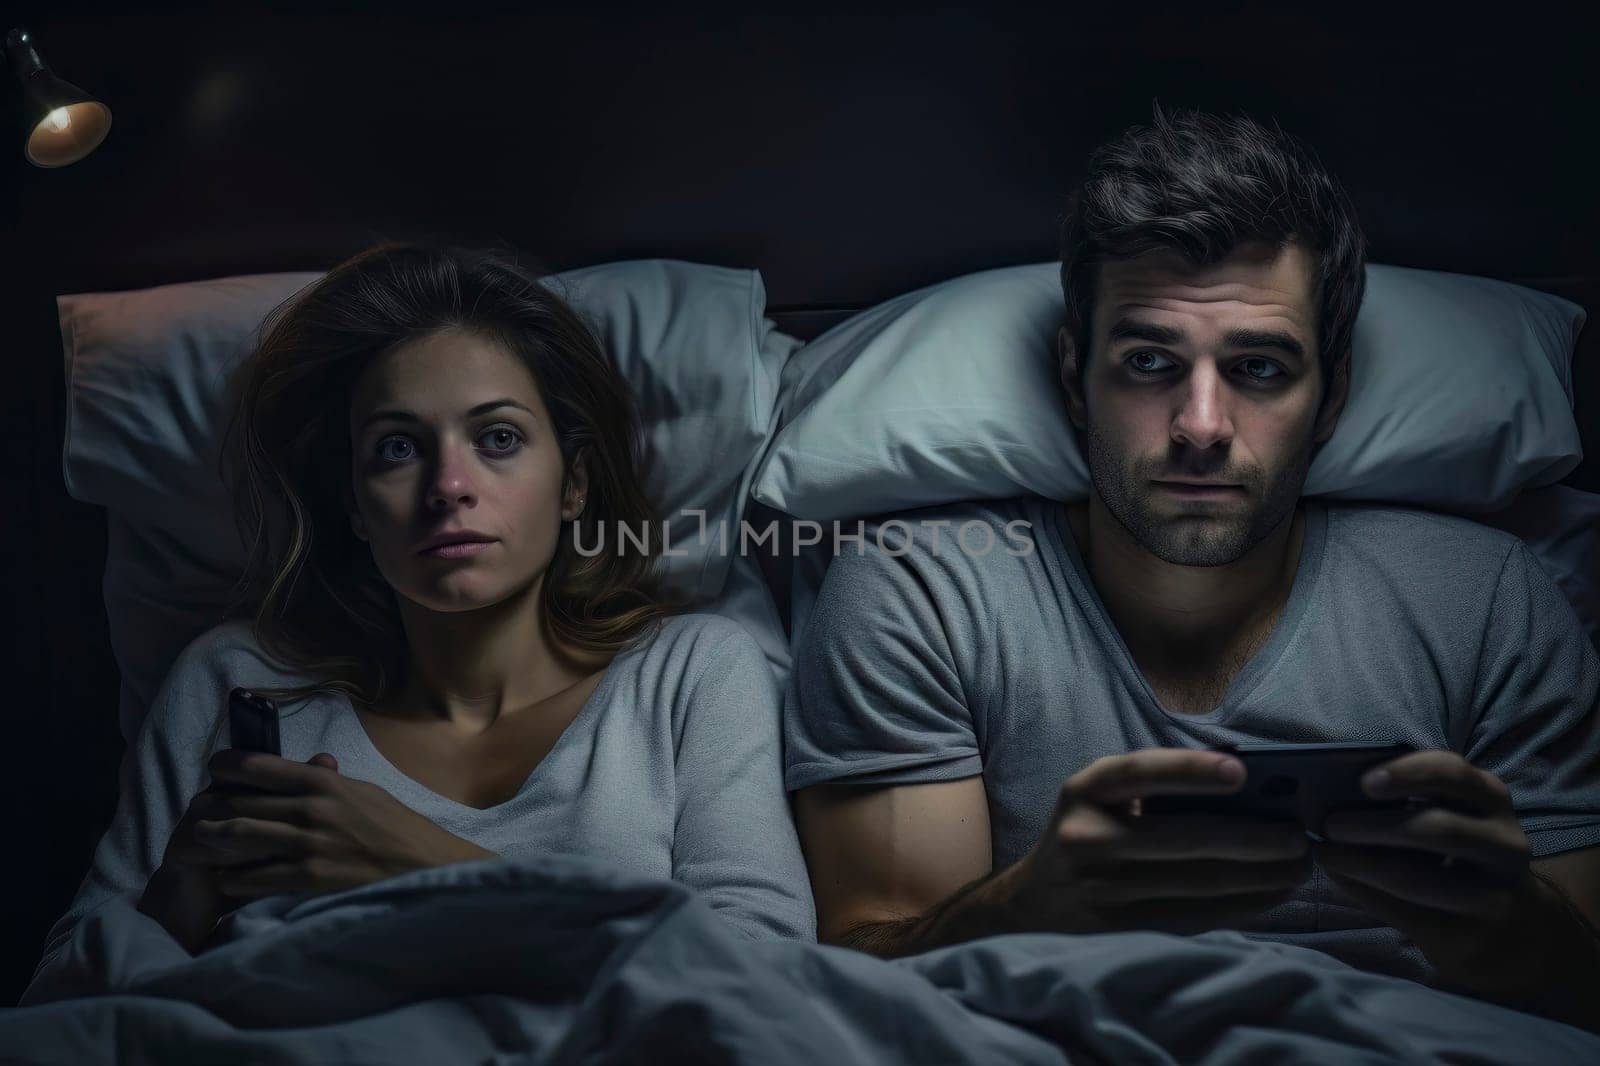 Photo of a couple in bed, each engrossed in their smartphones, representing excessive screen time impact.